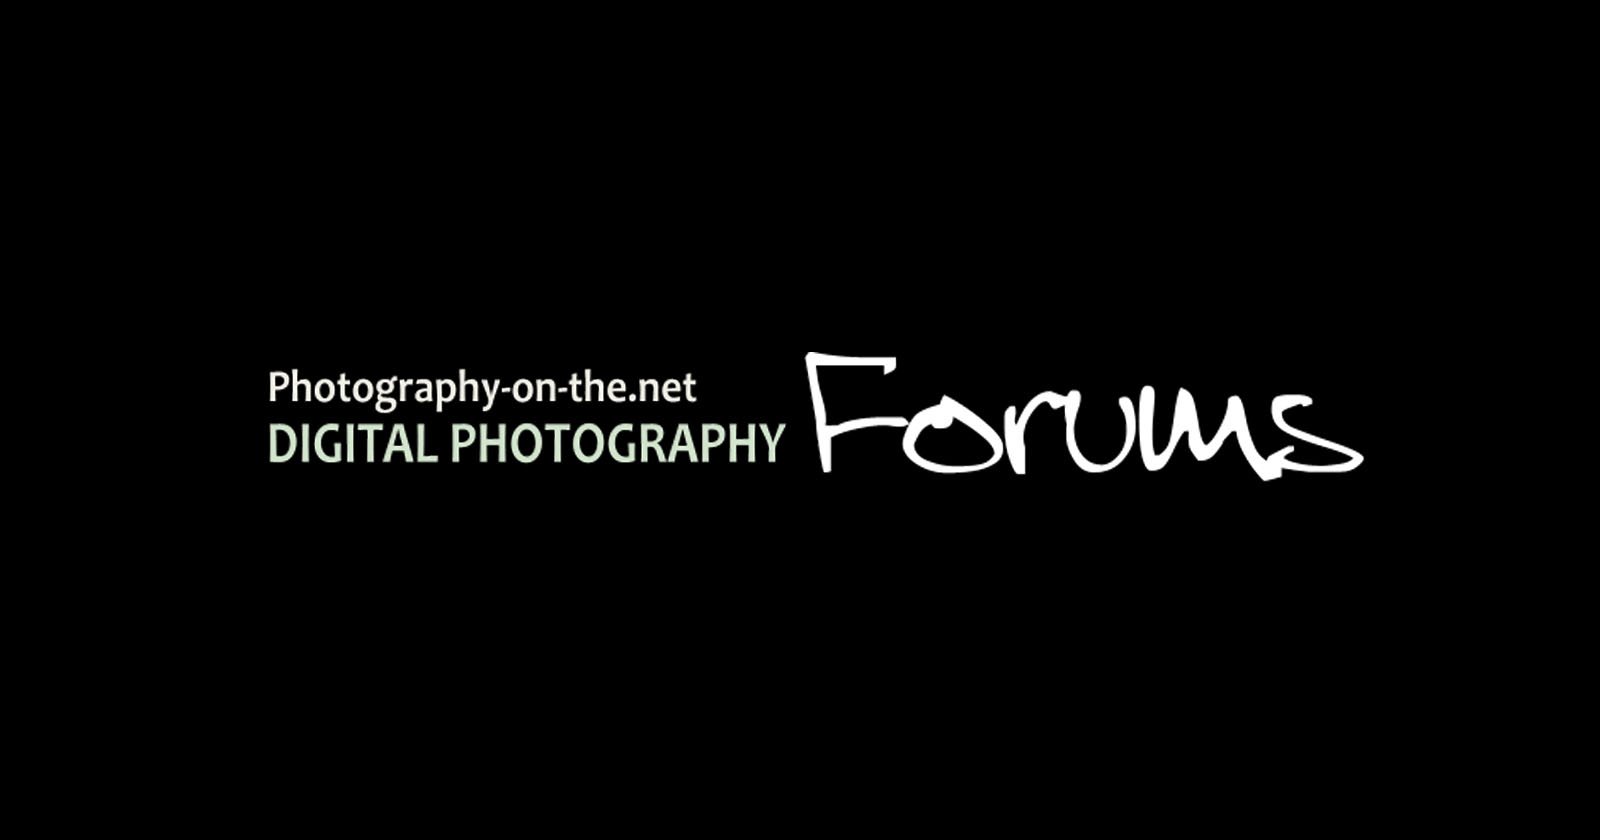 The Photography-on-the-Net Community forums is Shutting Down